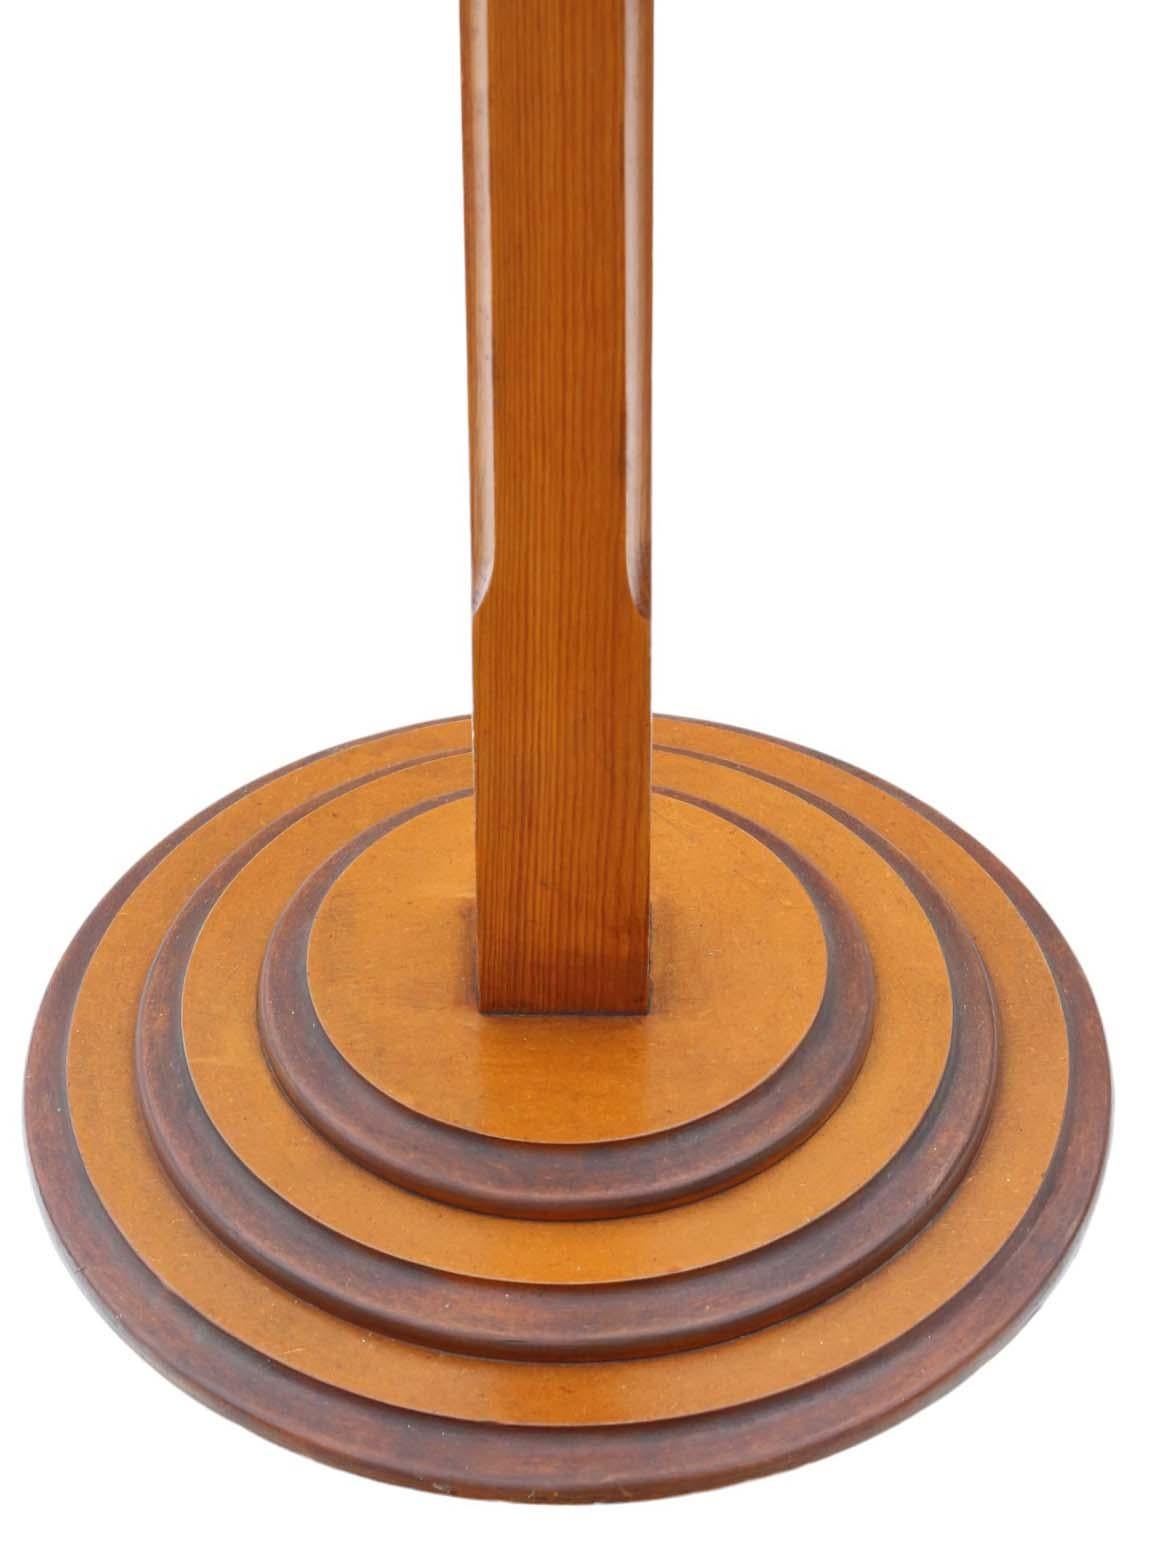 20th Century Vintage Retro Mixed Wood and Brass Hall Stand - Art Deco Style Coat/Hat Rack For Sale